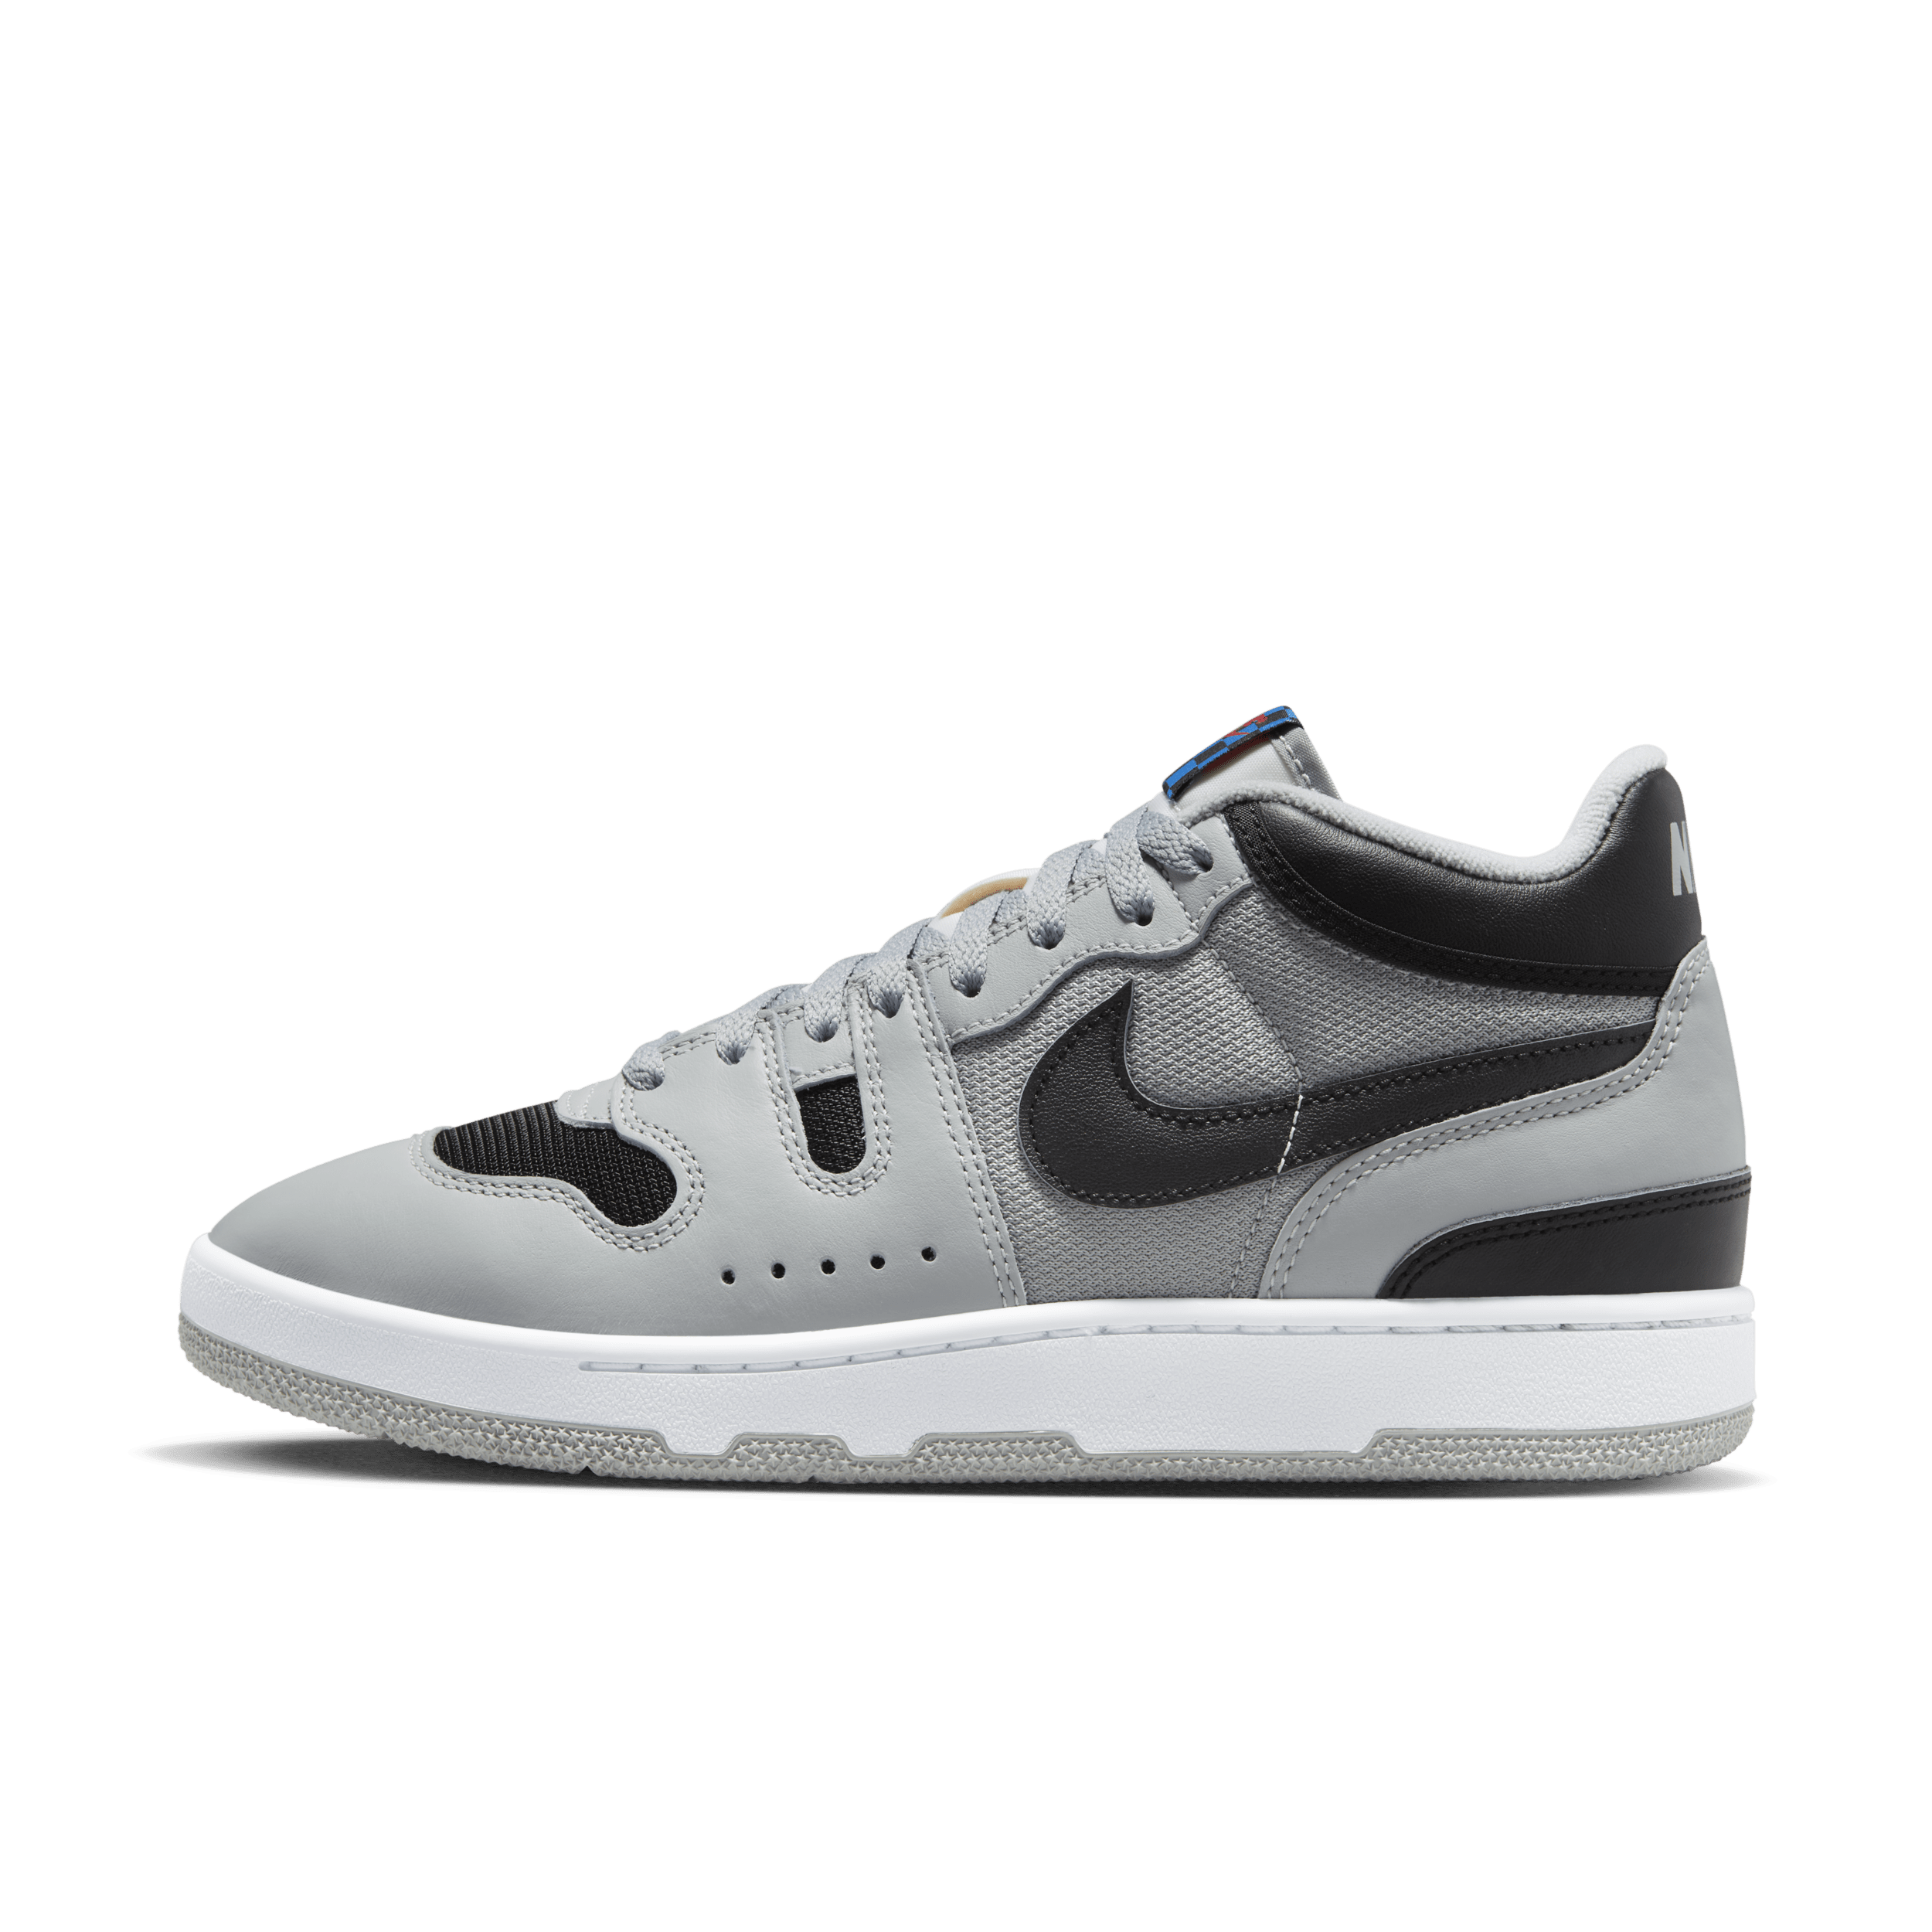 Nike Attack Men's Shoes - Grey